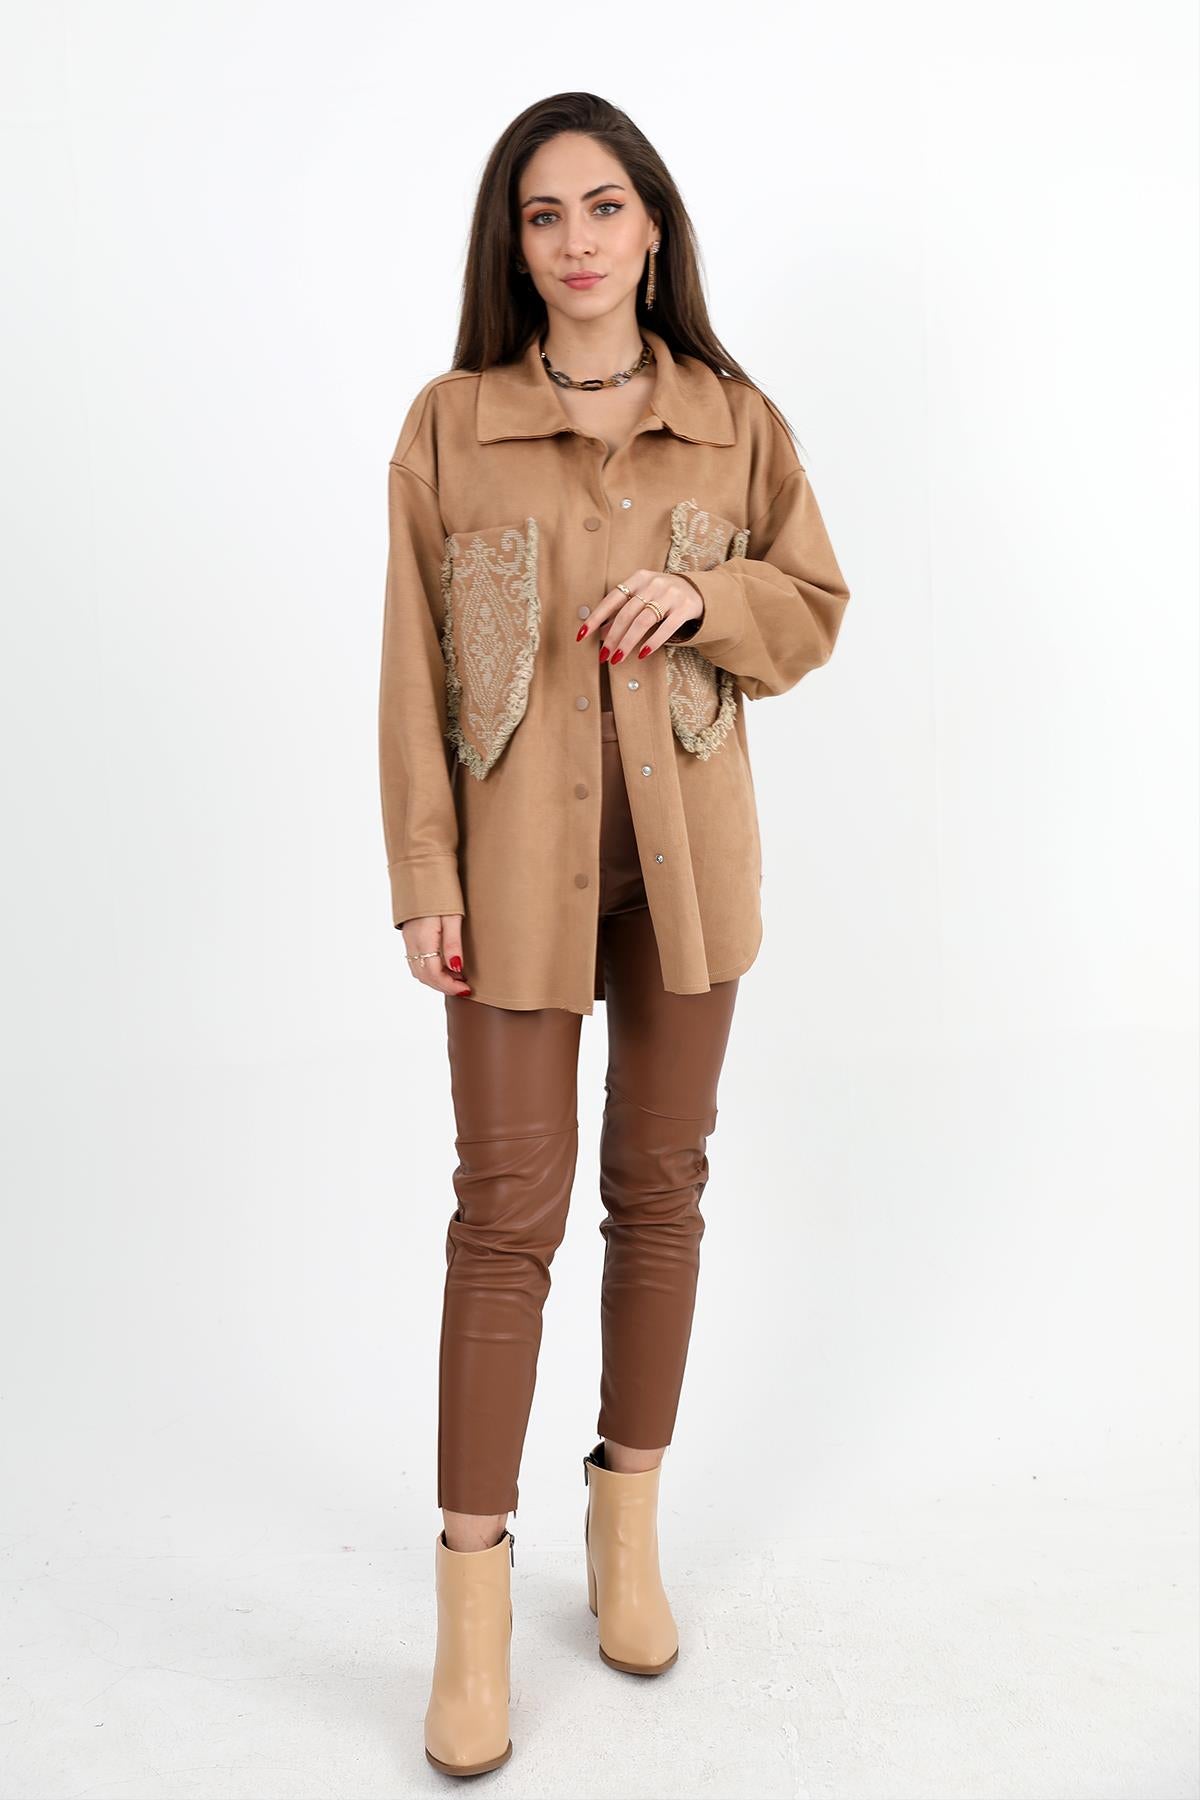 Women's Shirt Pocket Tasseled Embroidered Suede - Camel - STREETMODE™